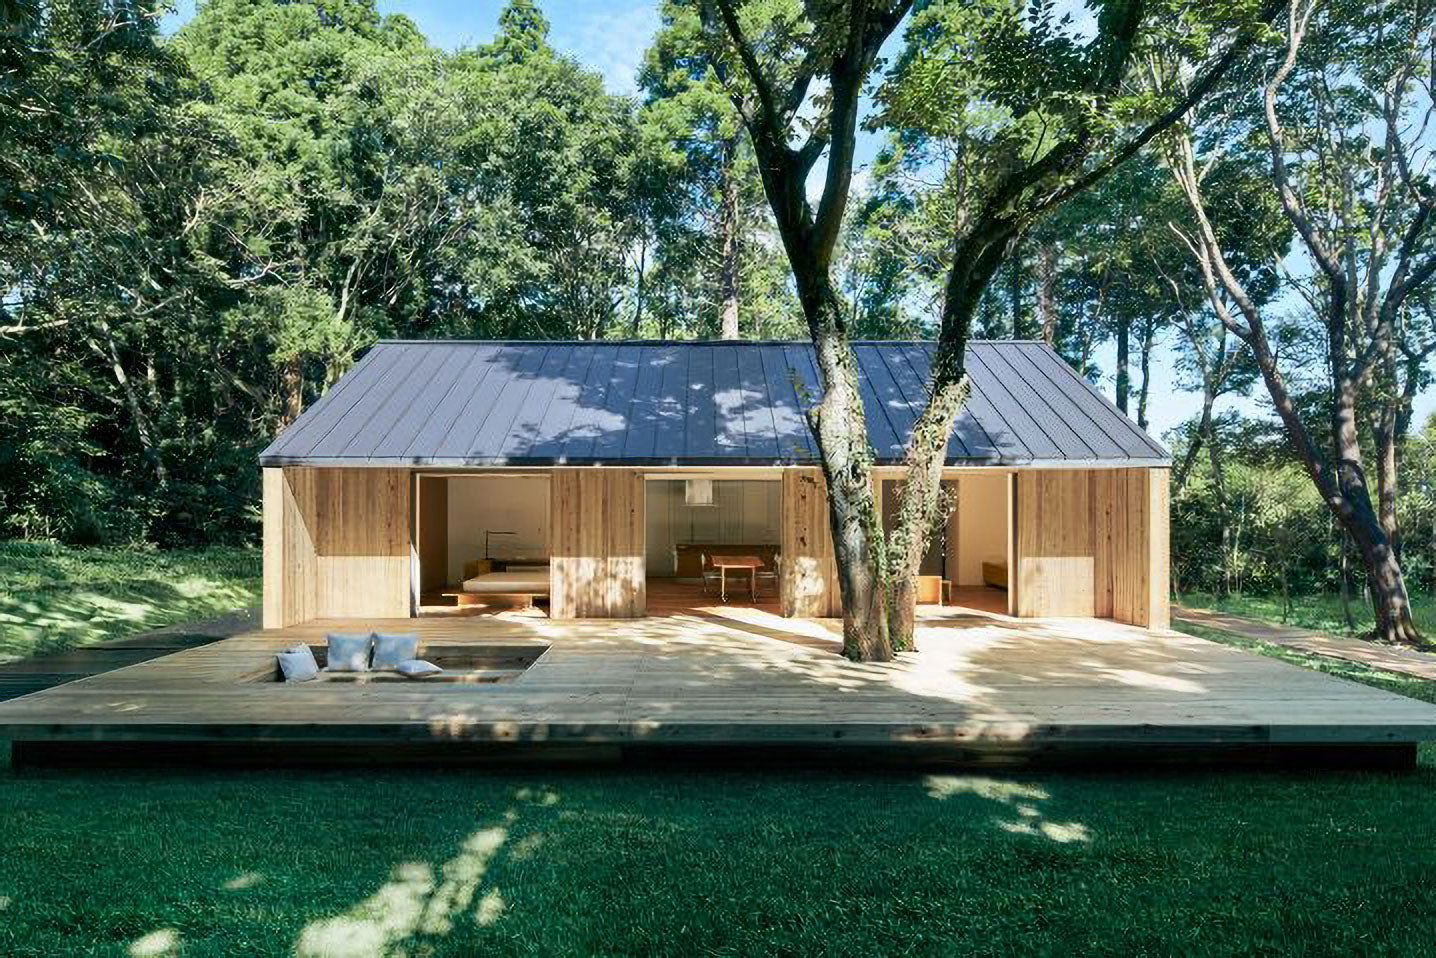 Muji's Pre-Fab Home Built for Minimalists